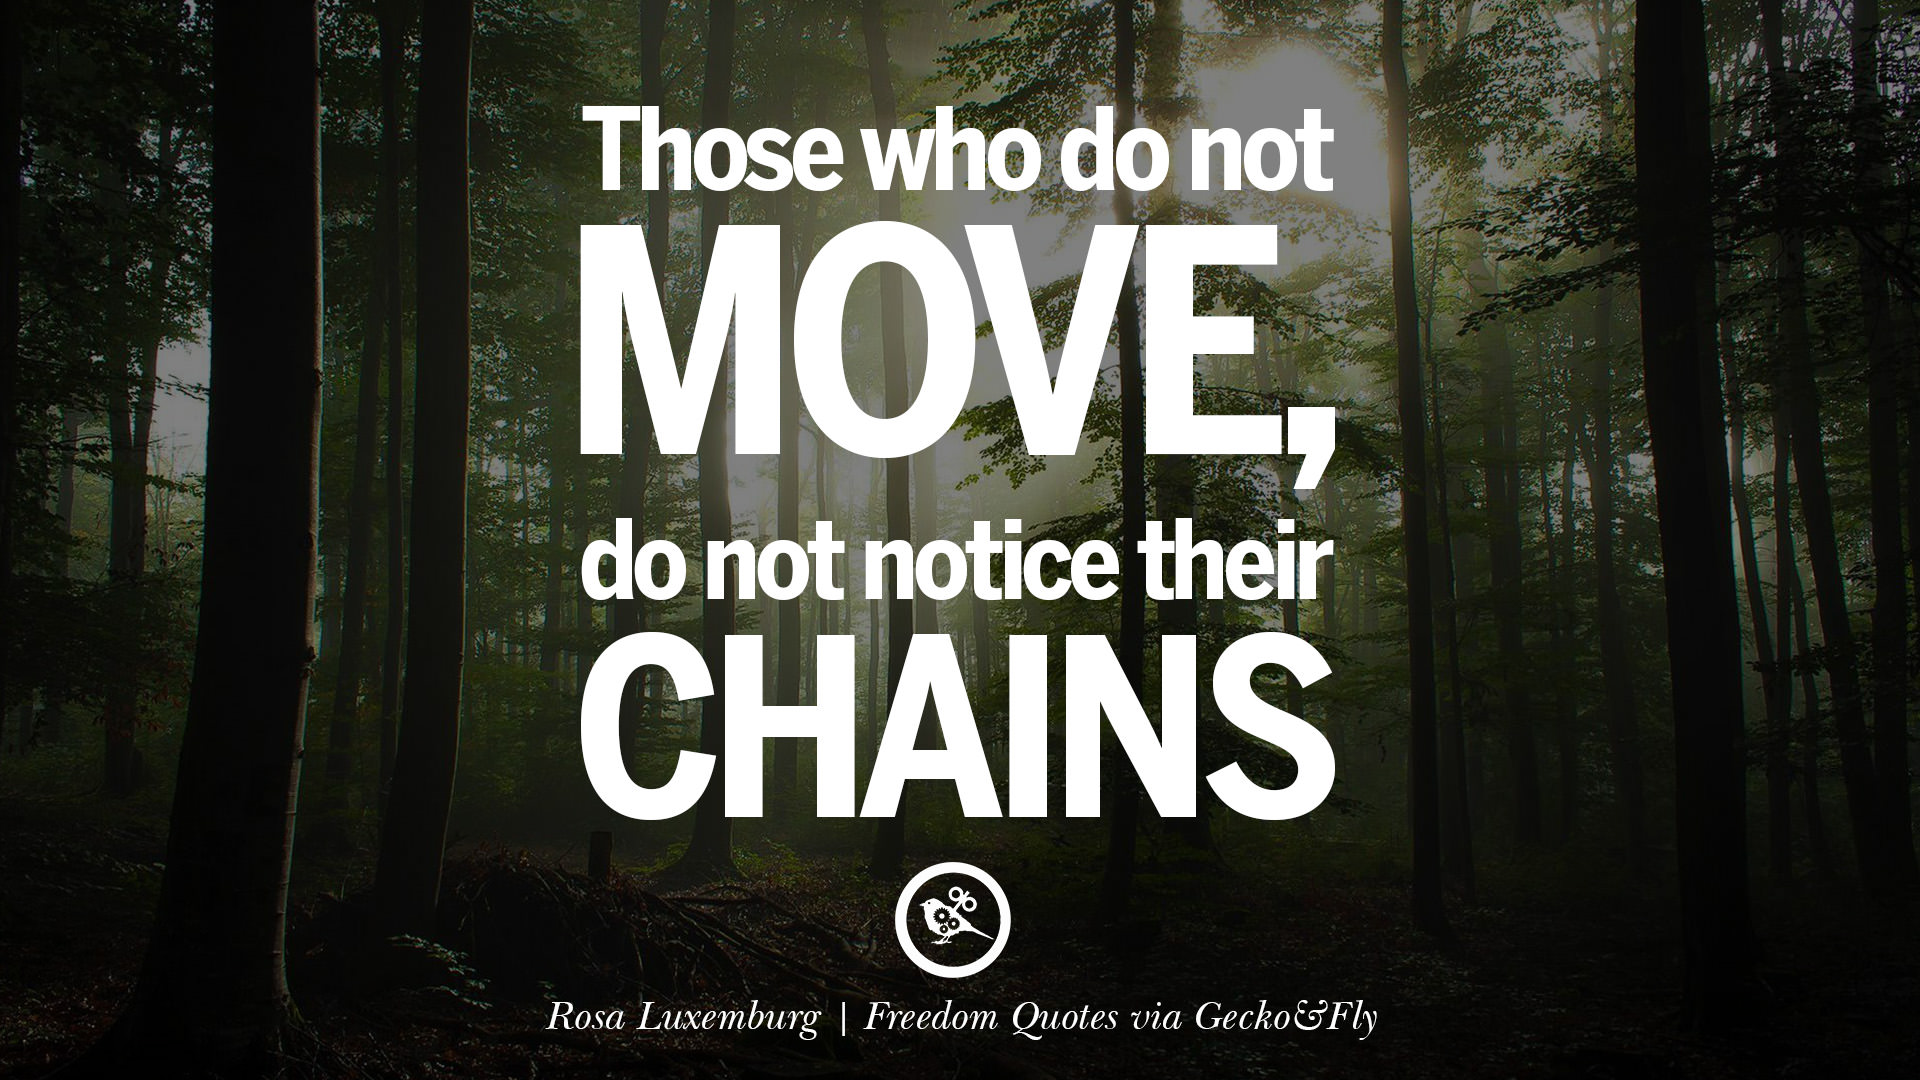 freedom quotes 01 - Chains